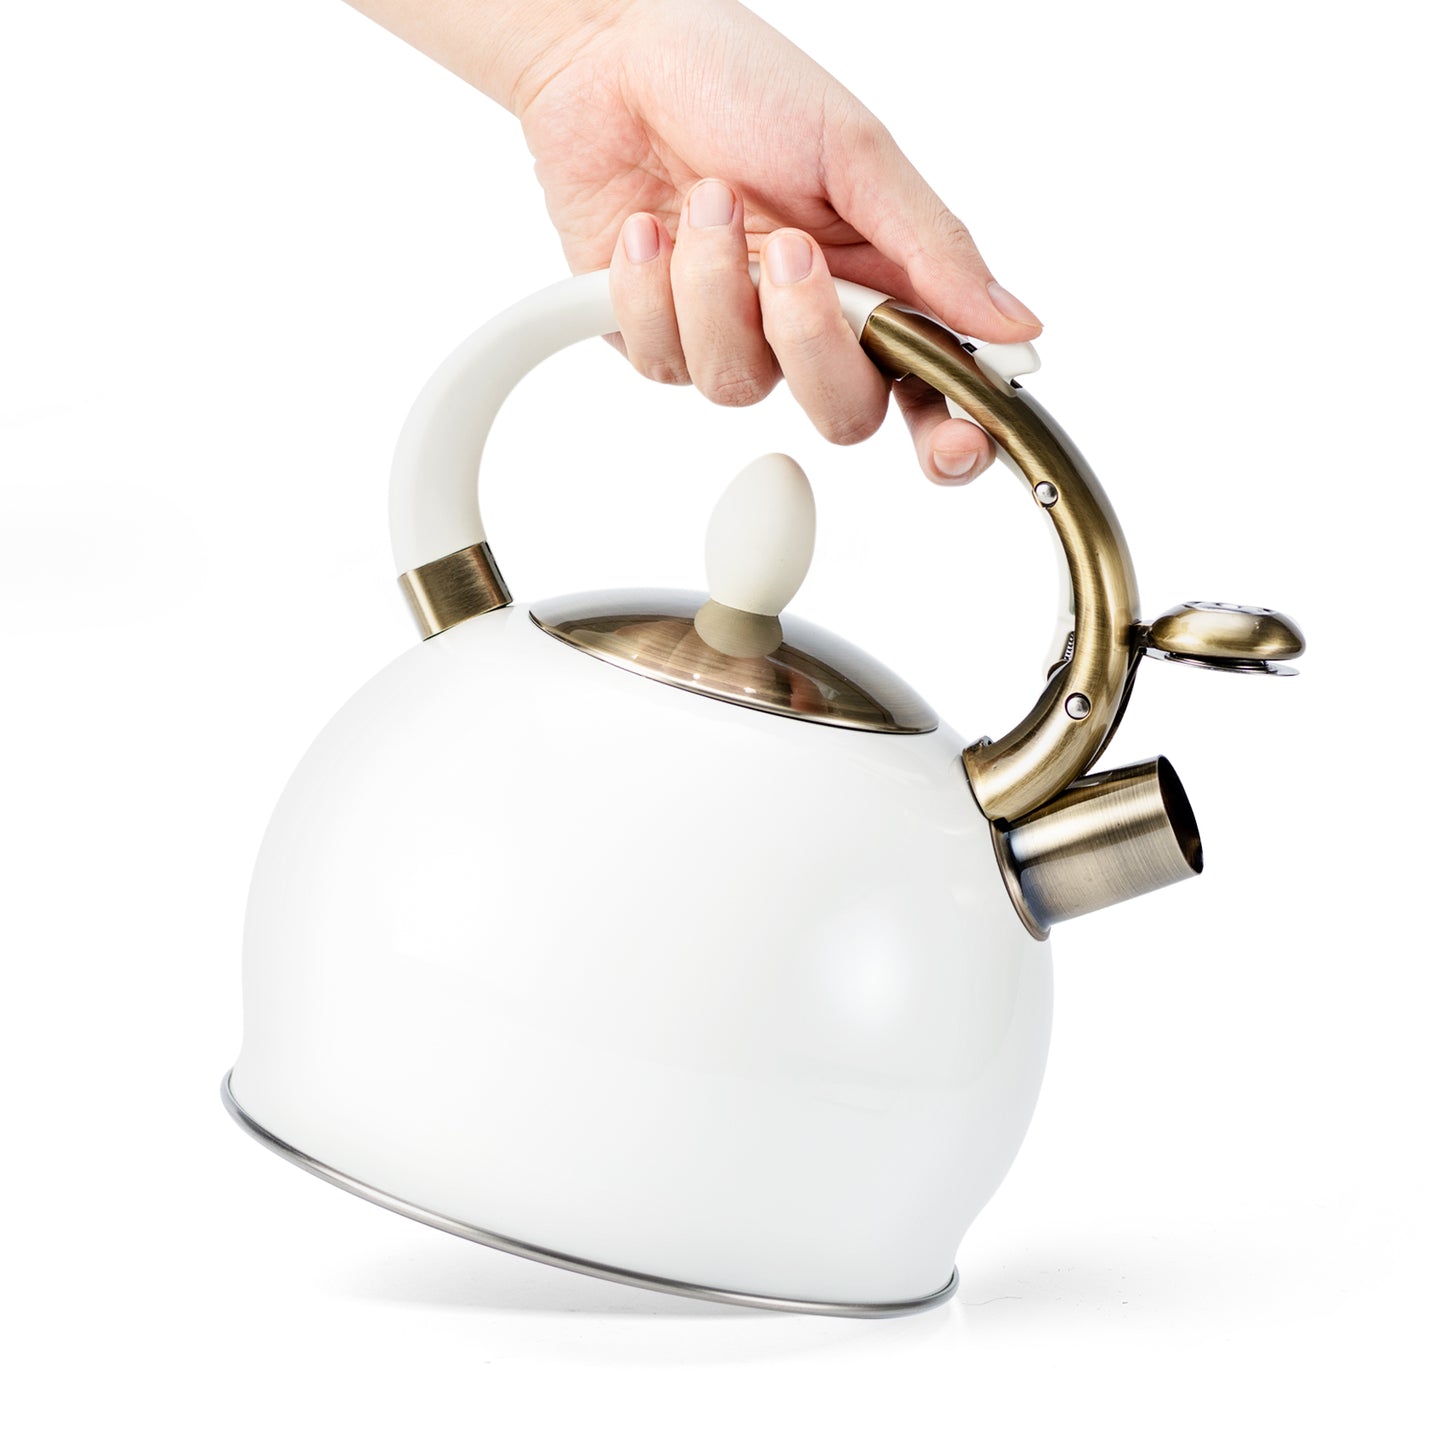 DclobTop Stove Top Whistling Tea Kettle 2.5 Quart Classic Teapot Appearance Culinary Grade Stainless Steel Teapot Composite Process Bottom